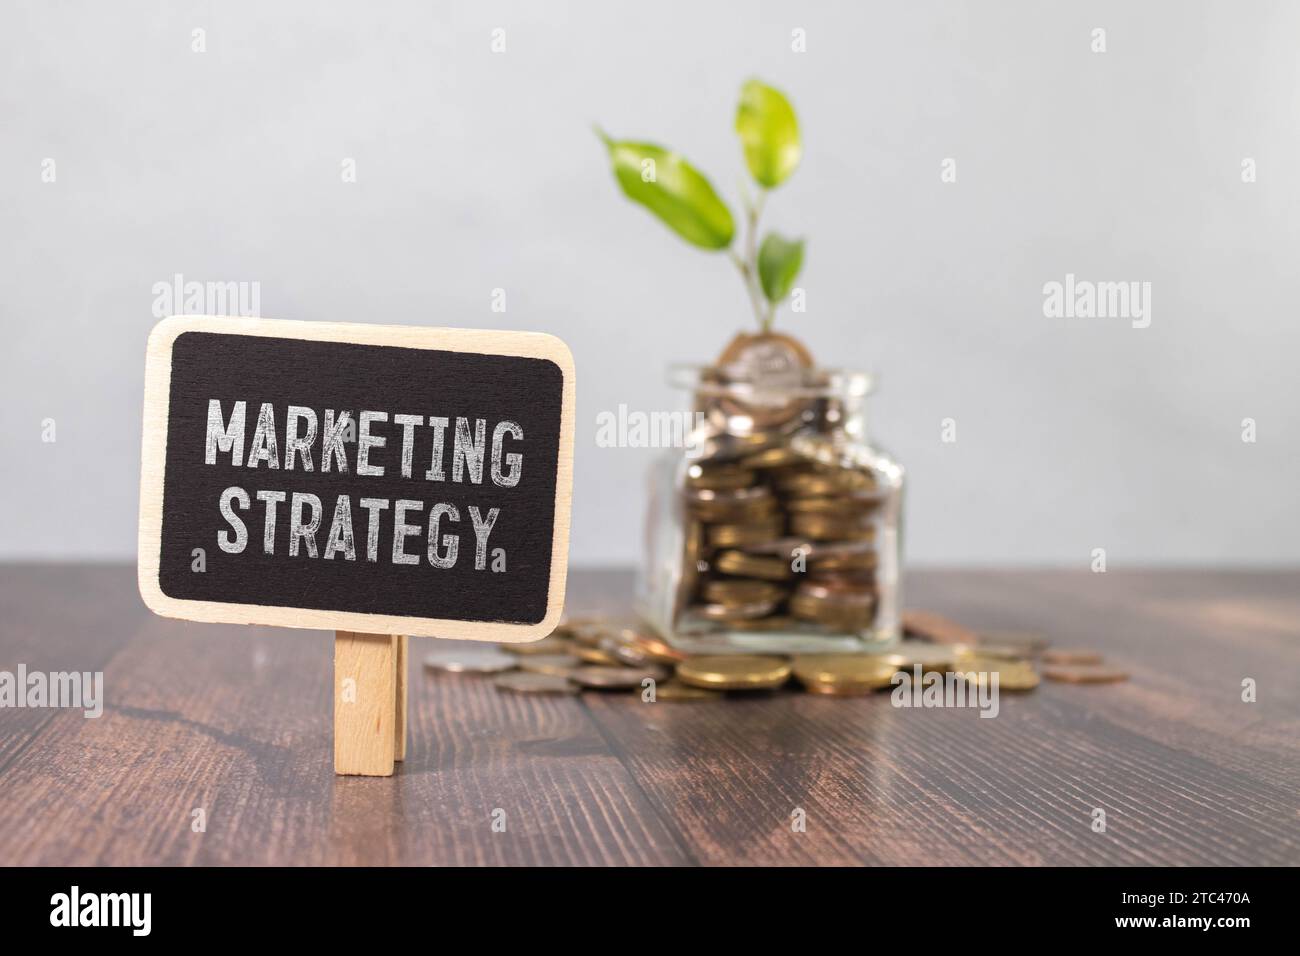 marketing strategy Concept. Chart with keywords and icons on white background Stock Photo